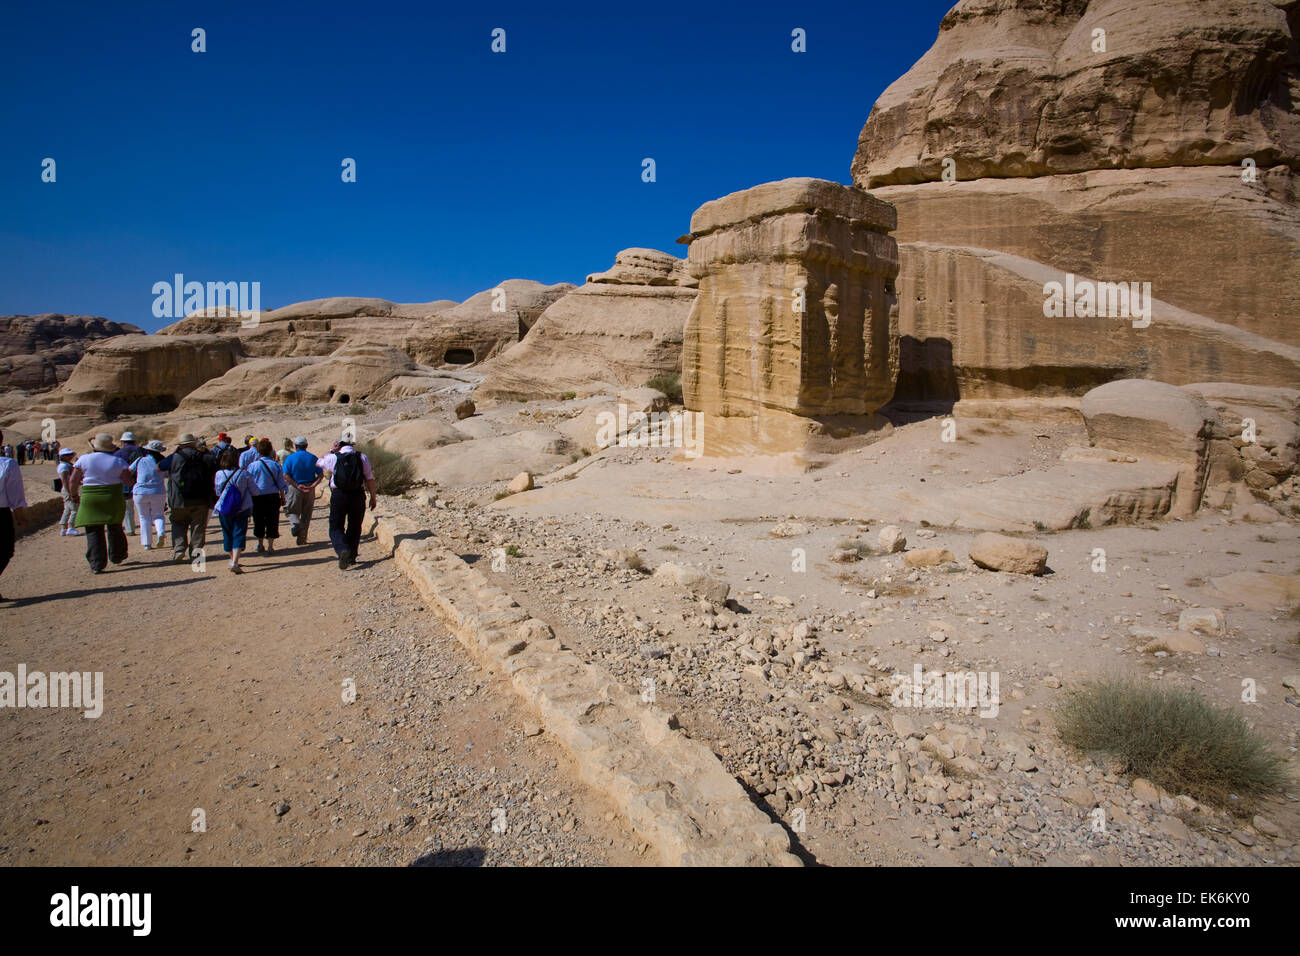 The so-called Djinn Blocks, a series of carved sandstone blocks stand near the main entrance to Petra, Jordan, Middle East Stock Photo